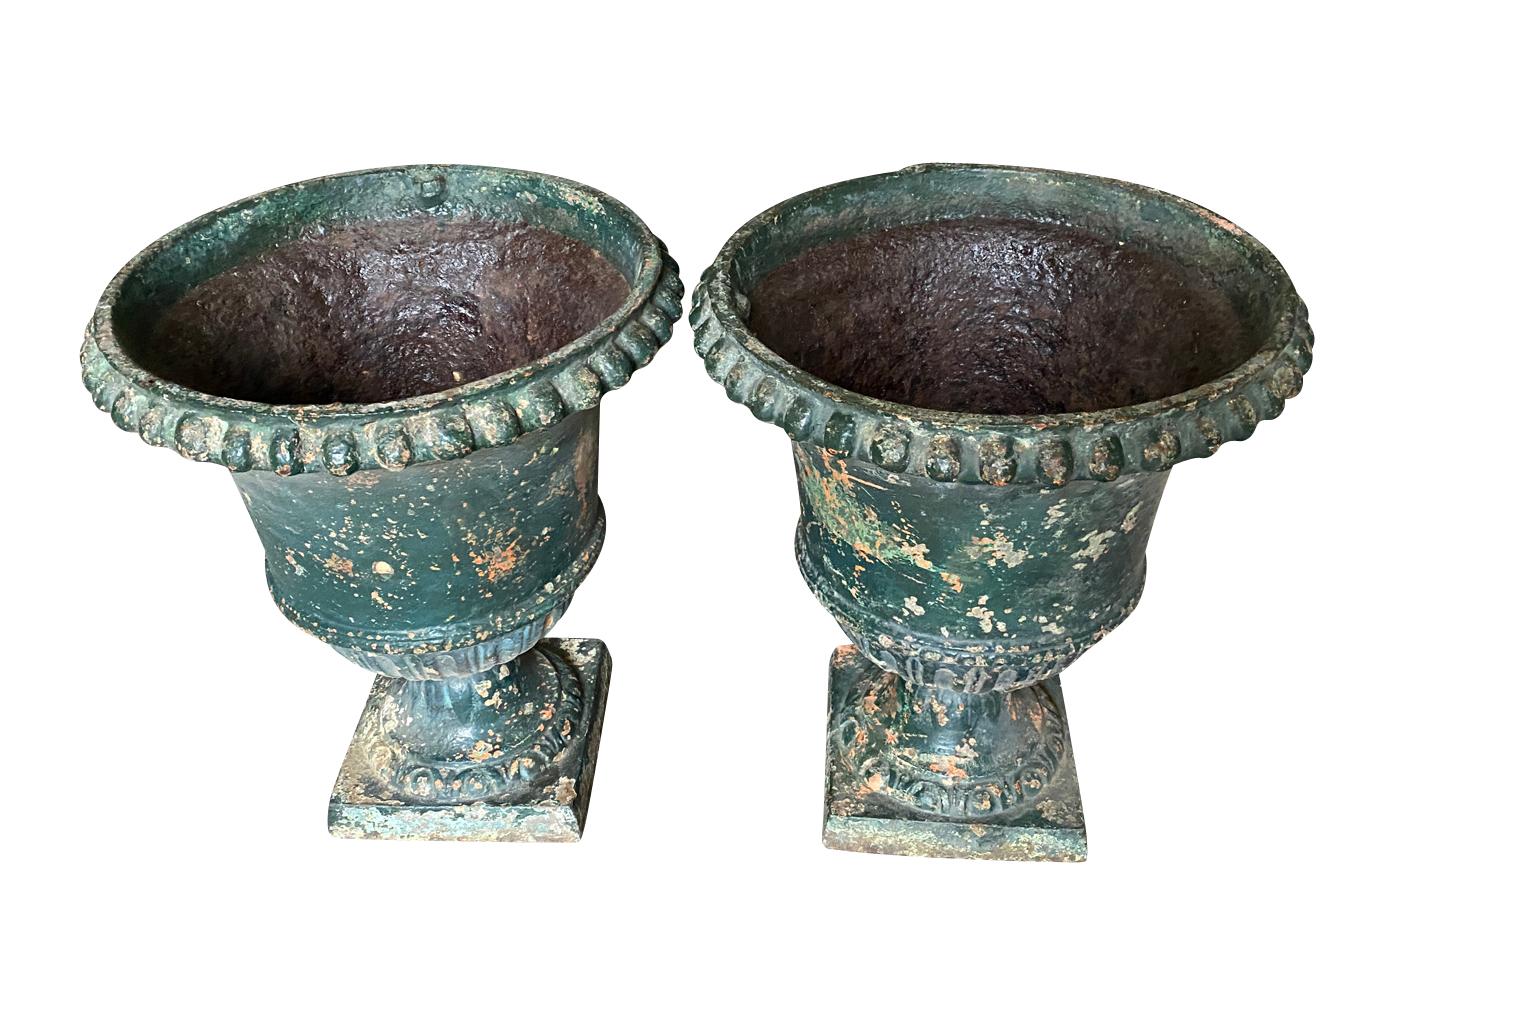 An exceptional pair of mid-18th century Medici Urns from the Provence region of France.  Beautifully crafted from iron with stunning lines.  Very weighty and excellent quality.  Stunning patina.